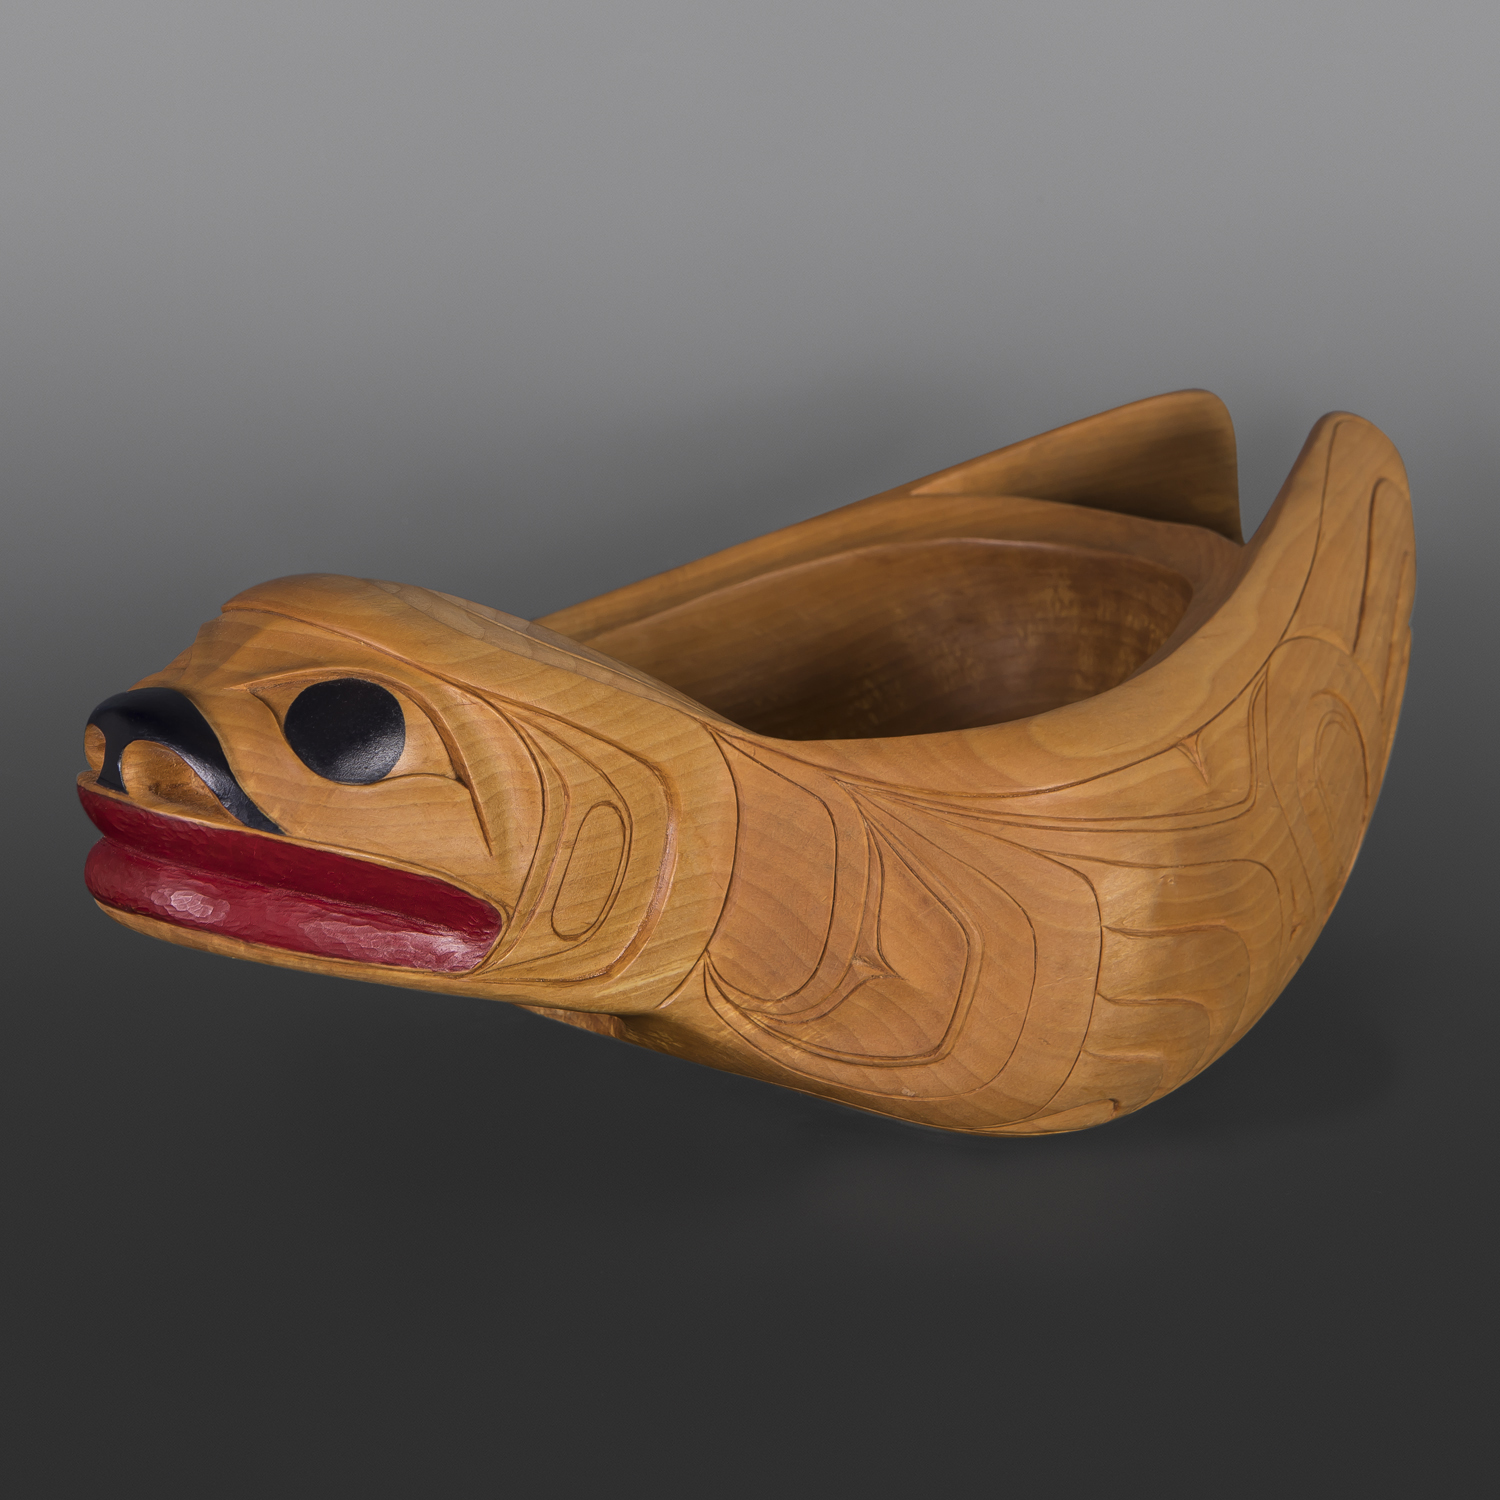 Spirit of the Seal Bowl
Carol Young Bagshaw
Haida
Alder, paint, custom stand
18" x 9" x 5" (24" tall with stand)
$7500